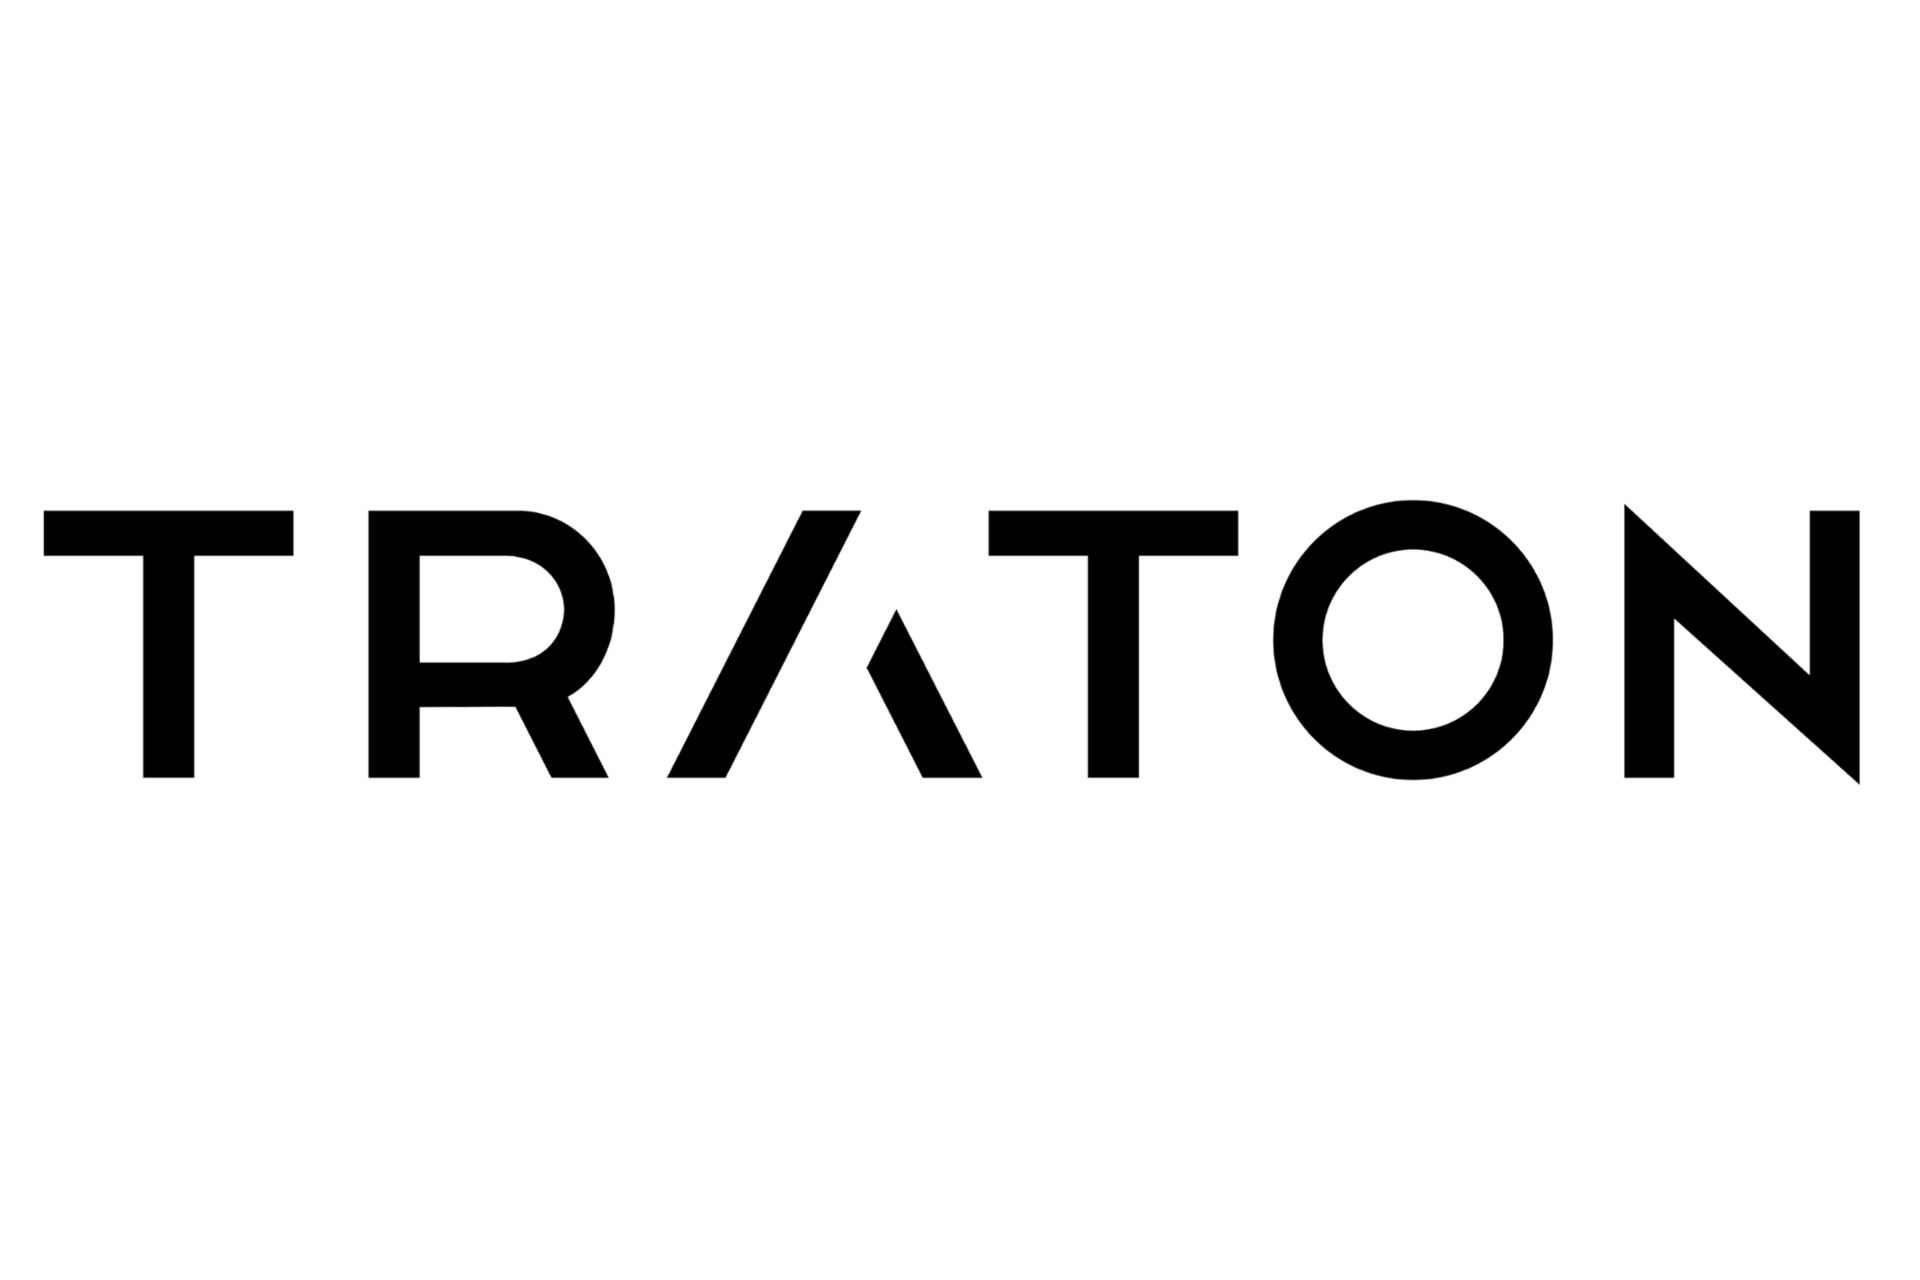 PNG of TRATONs logo in black
                 